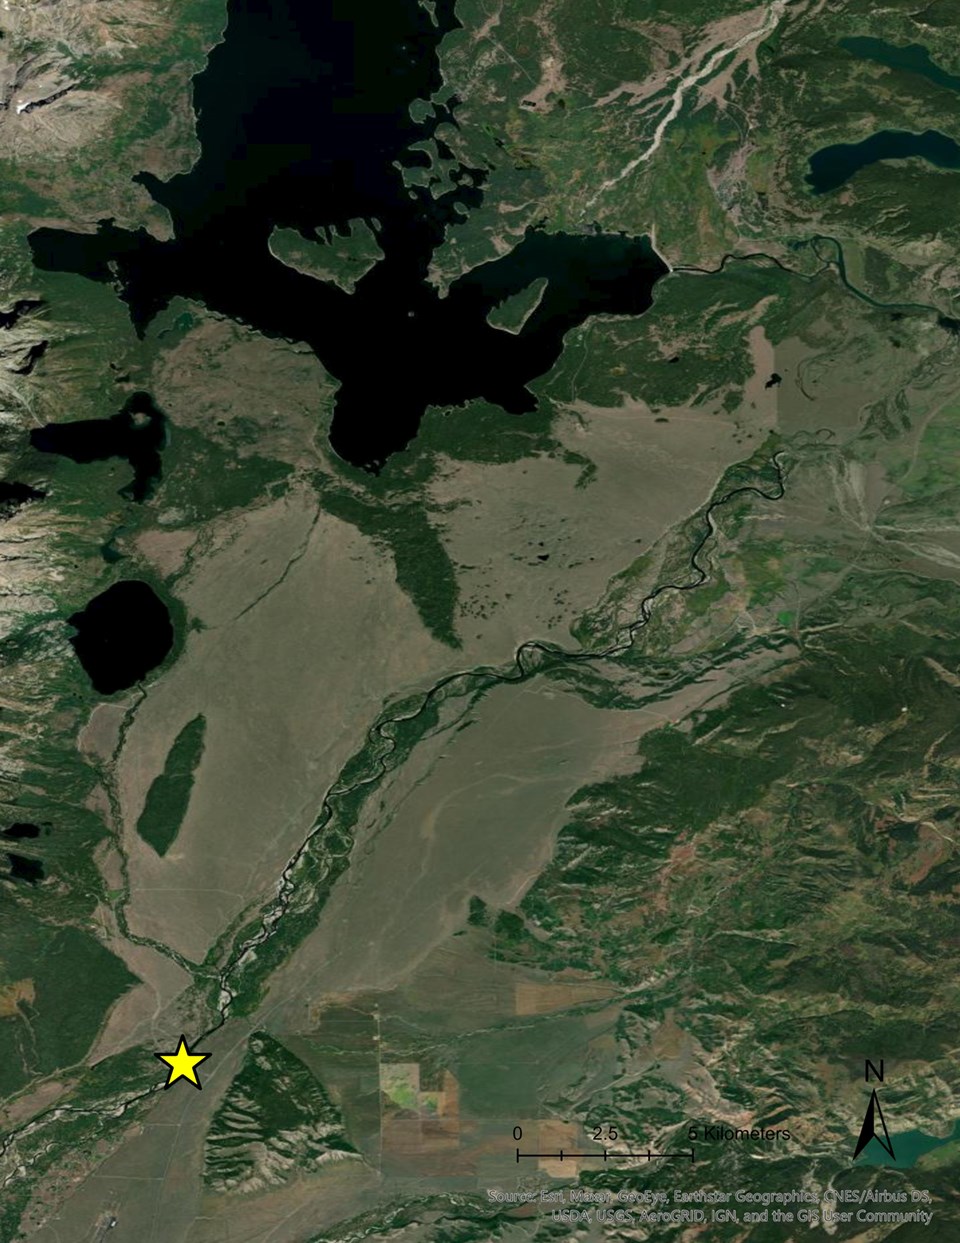 Map of Snake River with a star marking the Moose, WY, monitoring site below Jackson Lake